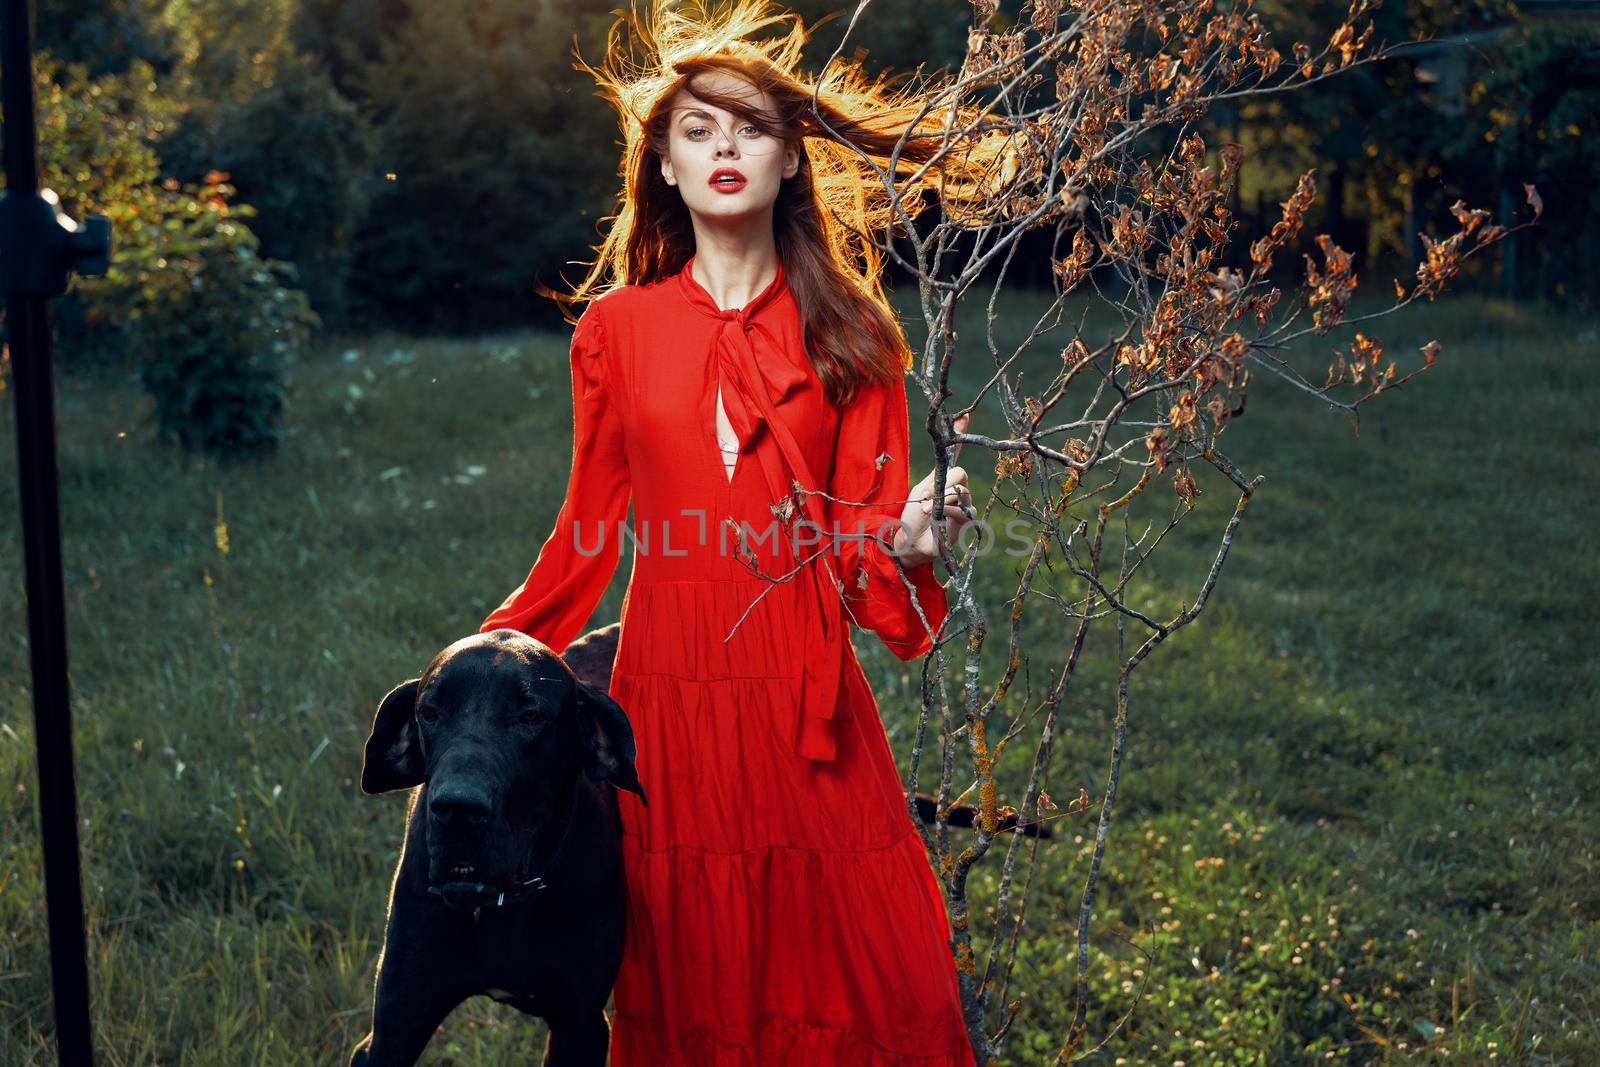 beautiful woman in a red dress outdoors with a black dog friendship by Vichizh